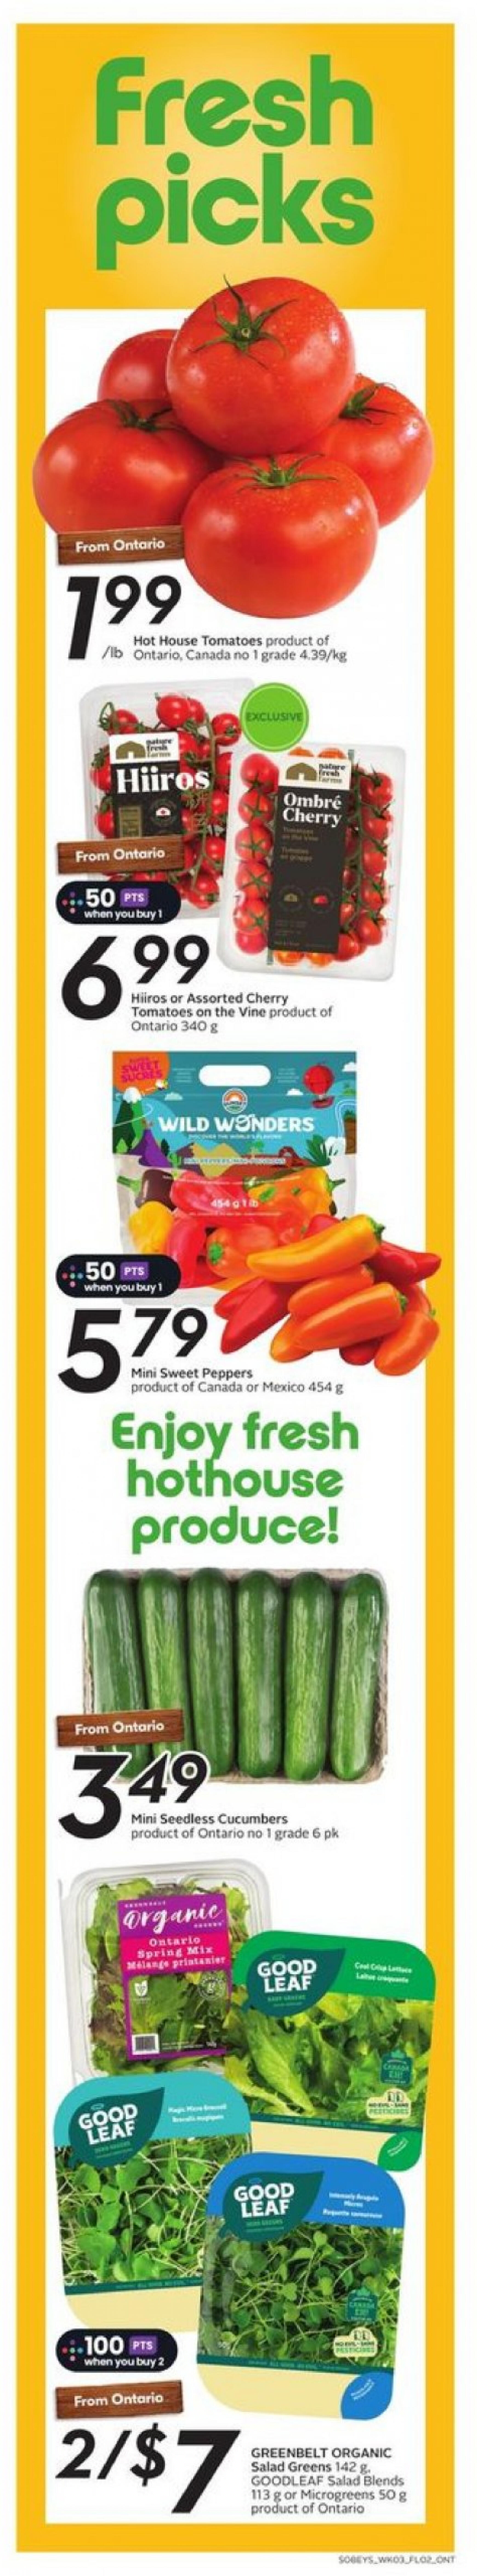 sobeys - Sobeys - Weekly Flyer - Ontario flyer current 16.05. - 22.05. - page: 3